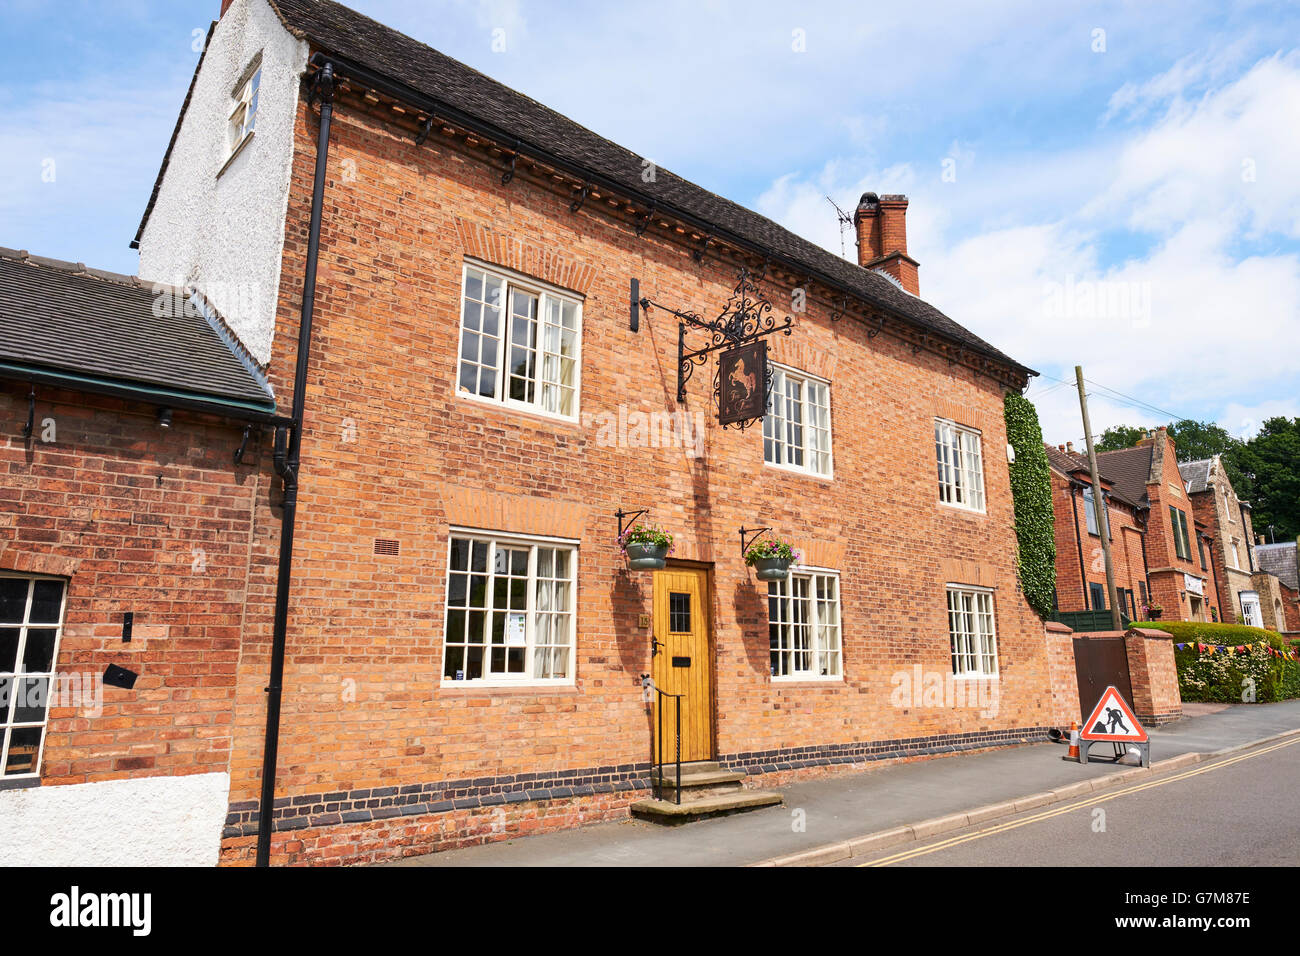 The Old Forge Park Street Market Bosworth Leicestershire UK Stock Photo